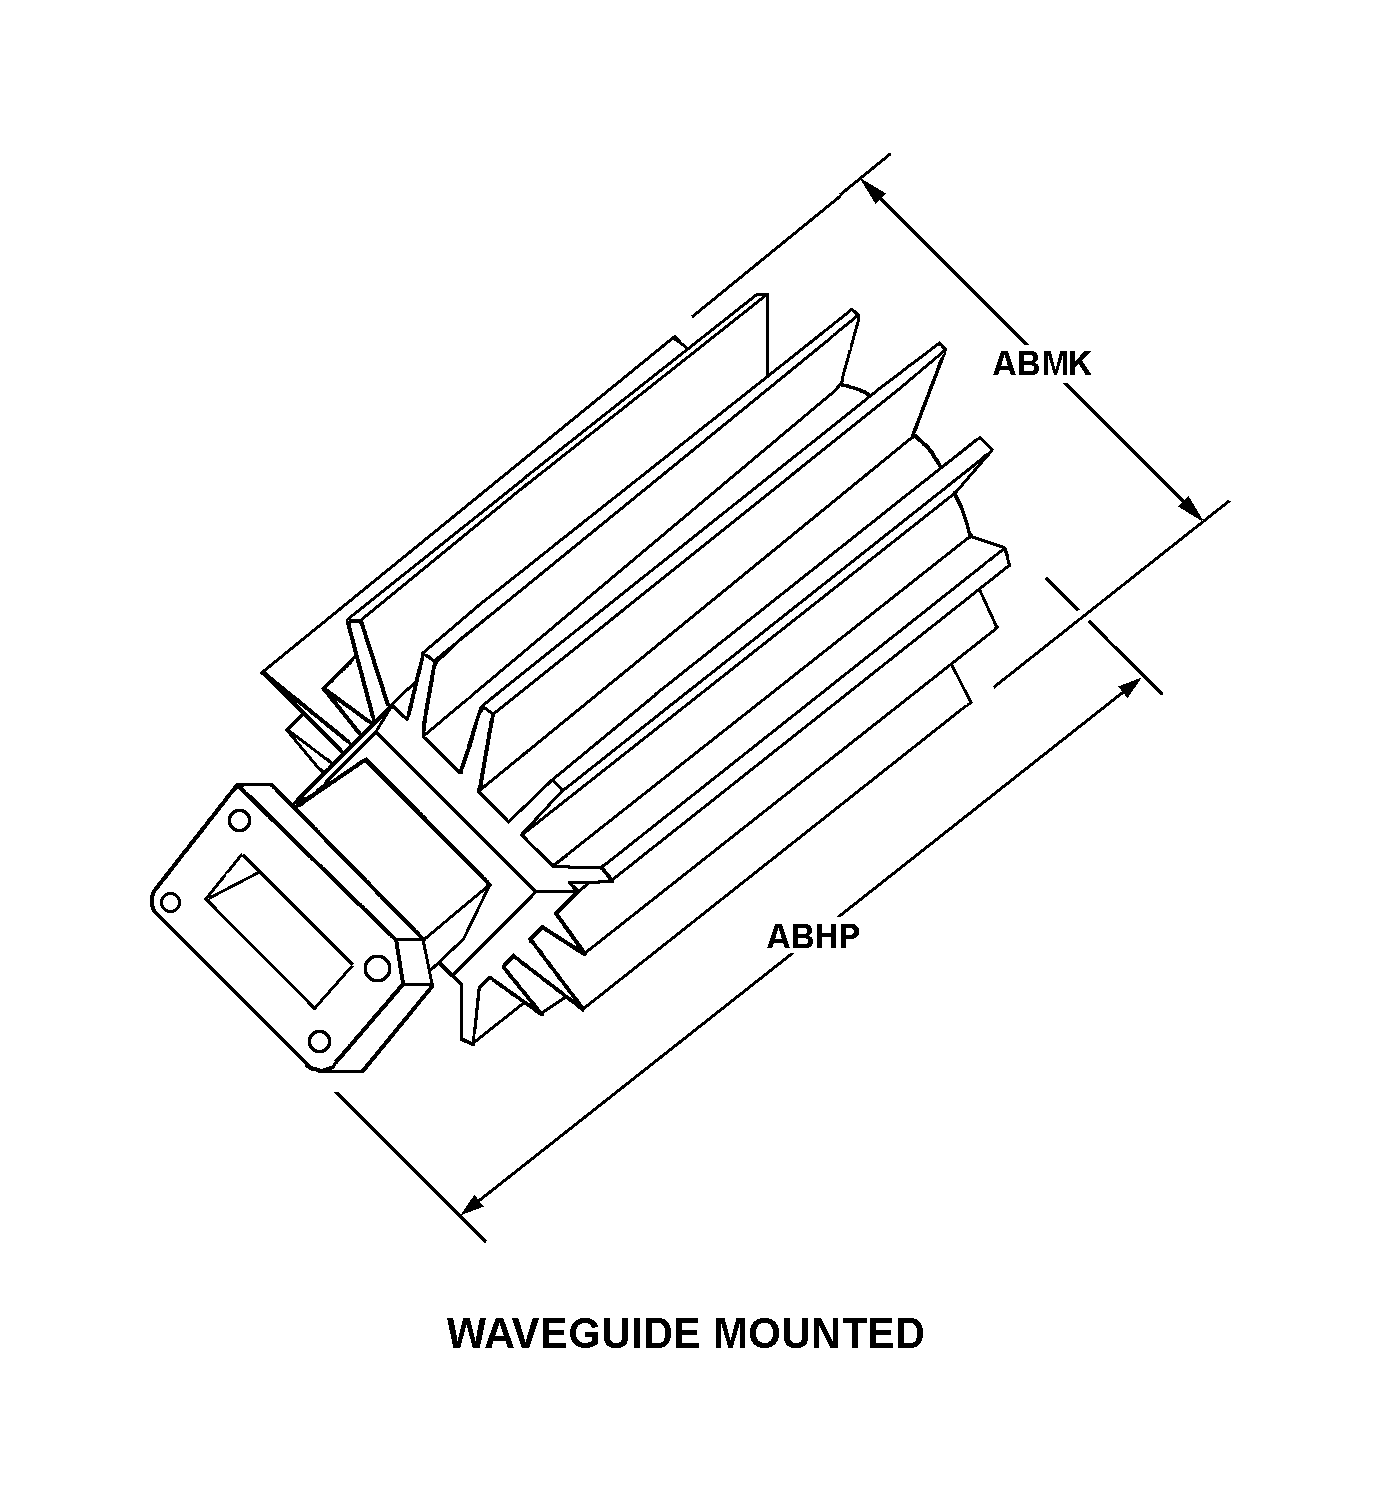 WAVEGUIDE MOUNTED style nsn 5985-01-445-8060